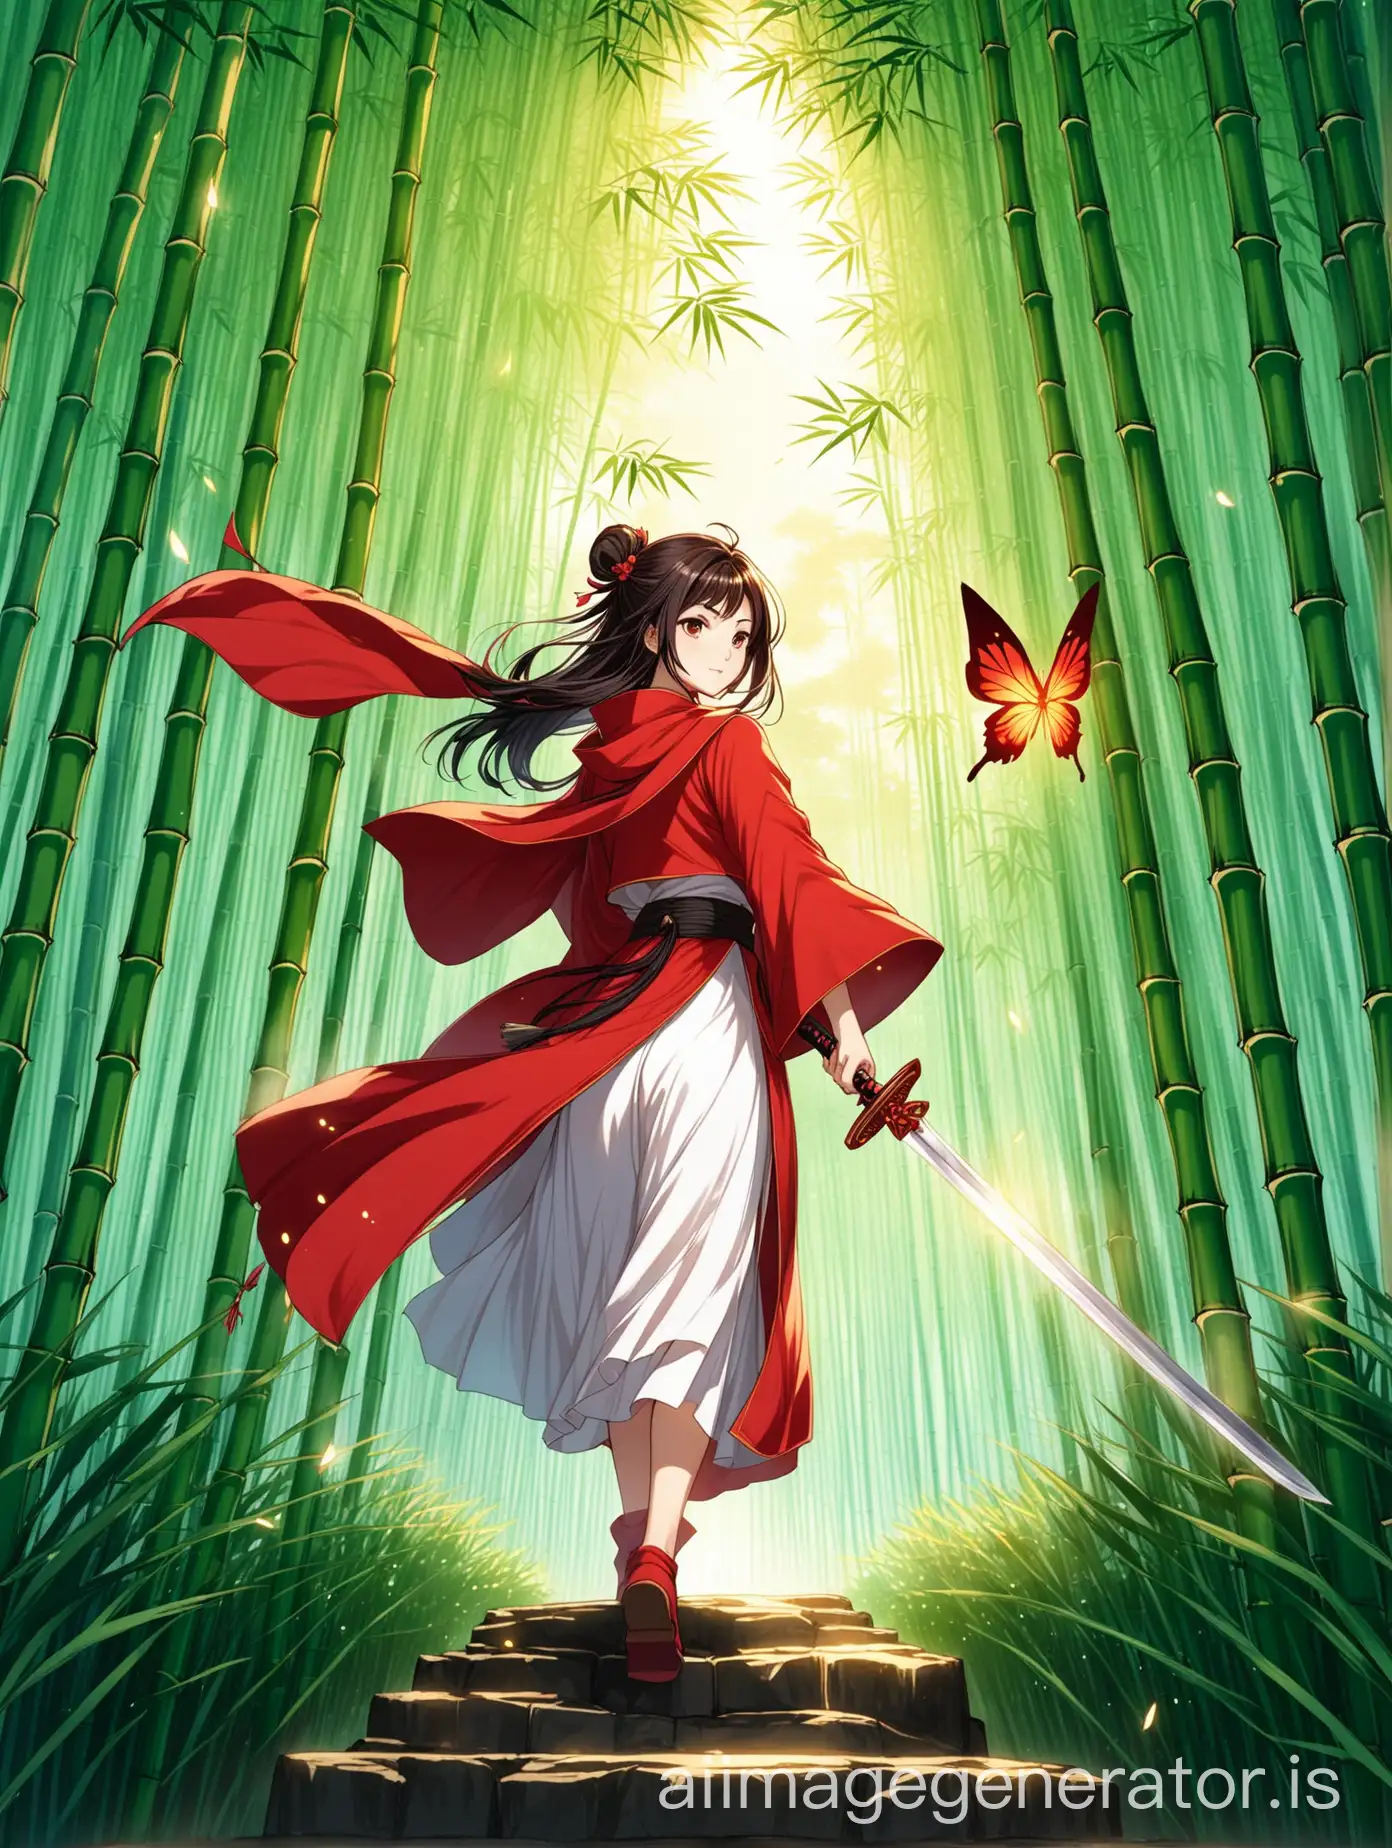 Wuxia style anime of a girl in red cloak holding a sword in a bamboo forest, with a glowing red butterfly flying